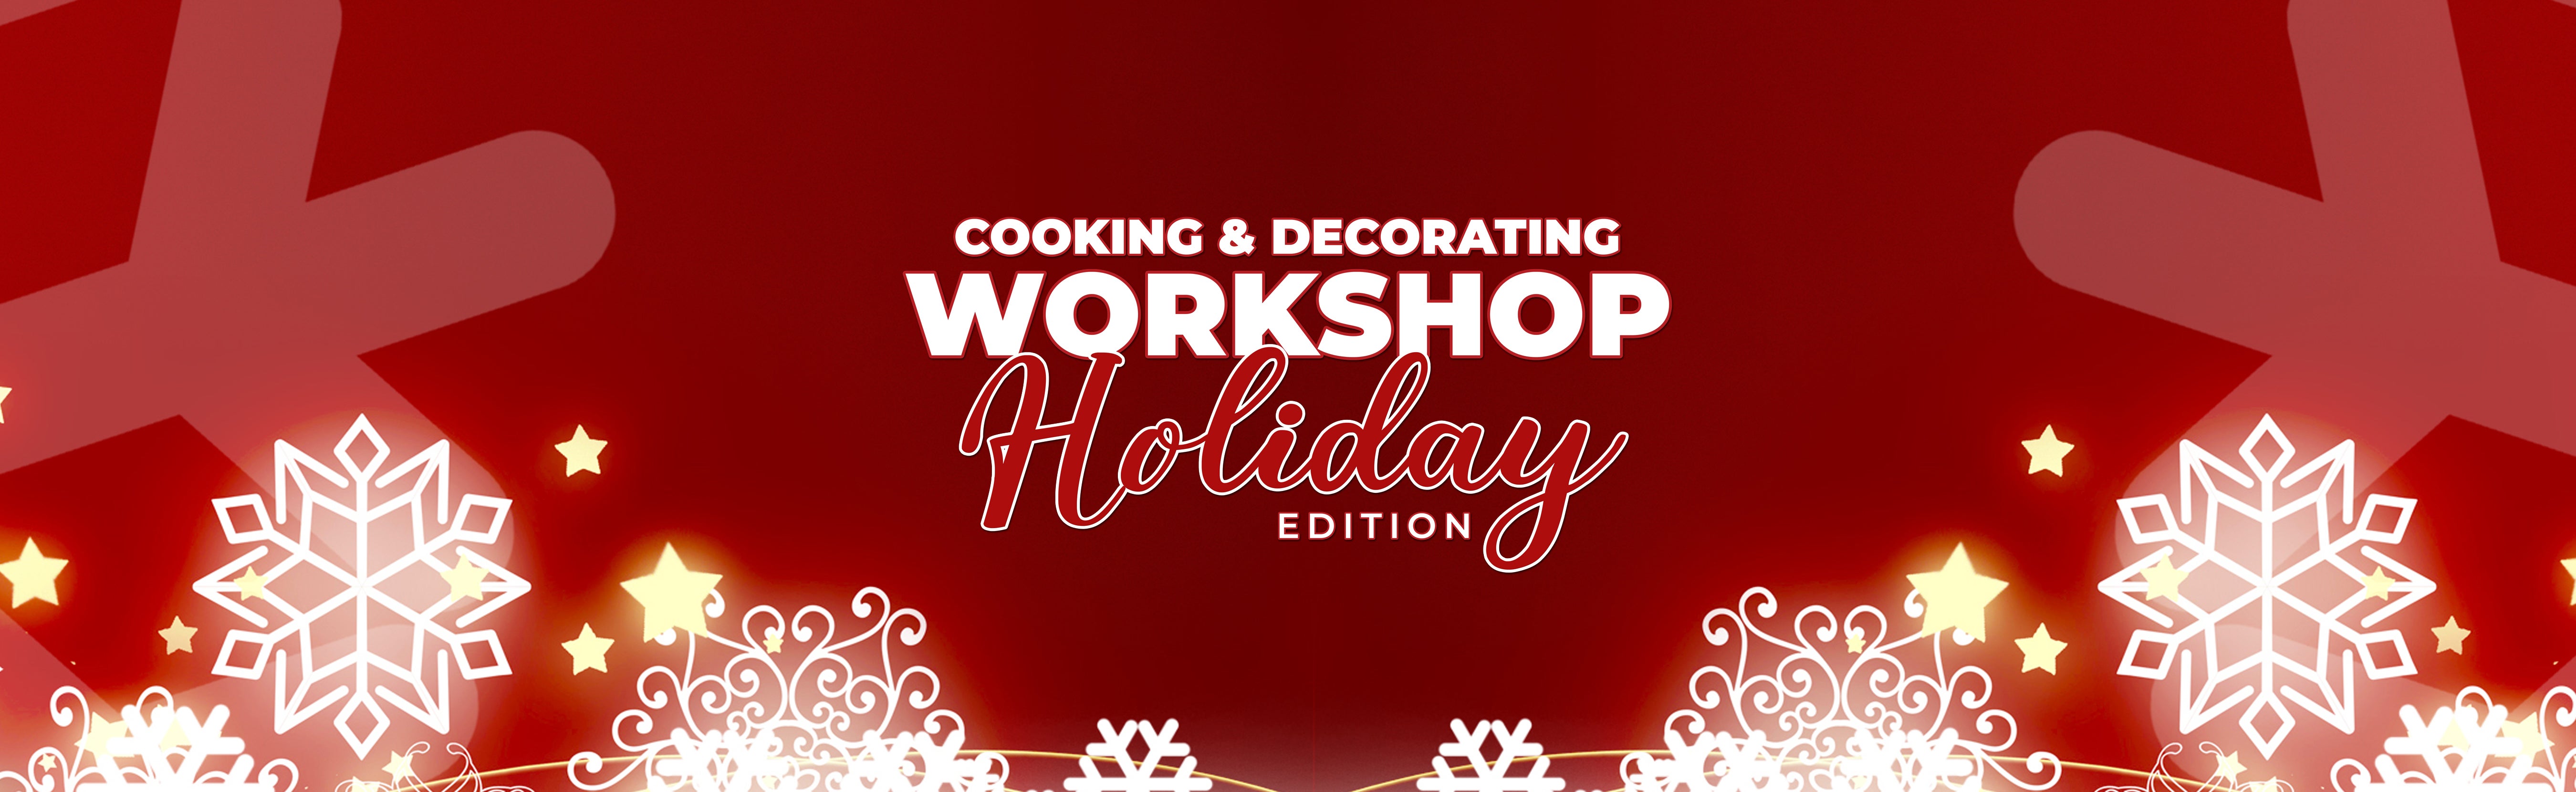 Cooking & Decoration Workshop: Holiday Edition